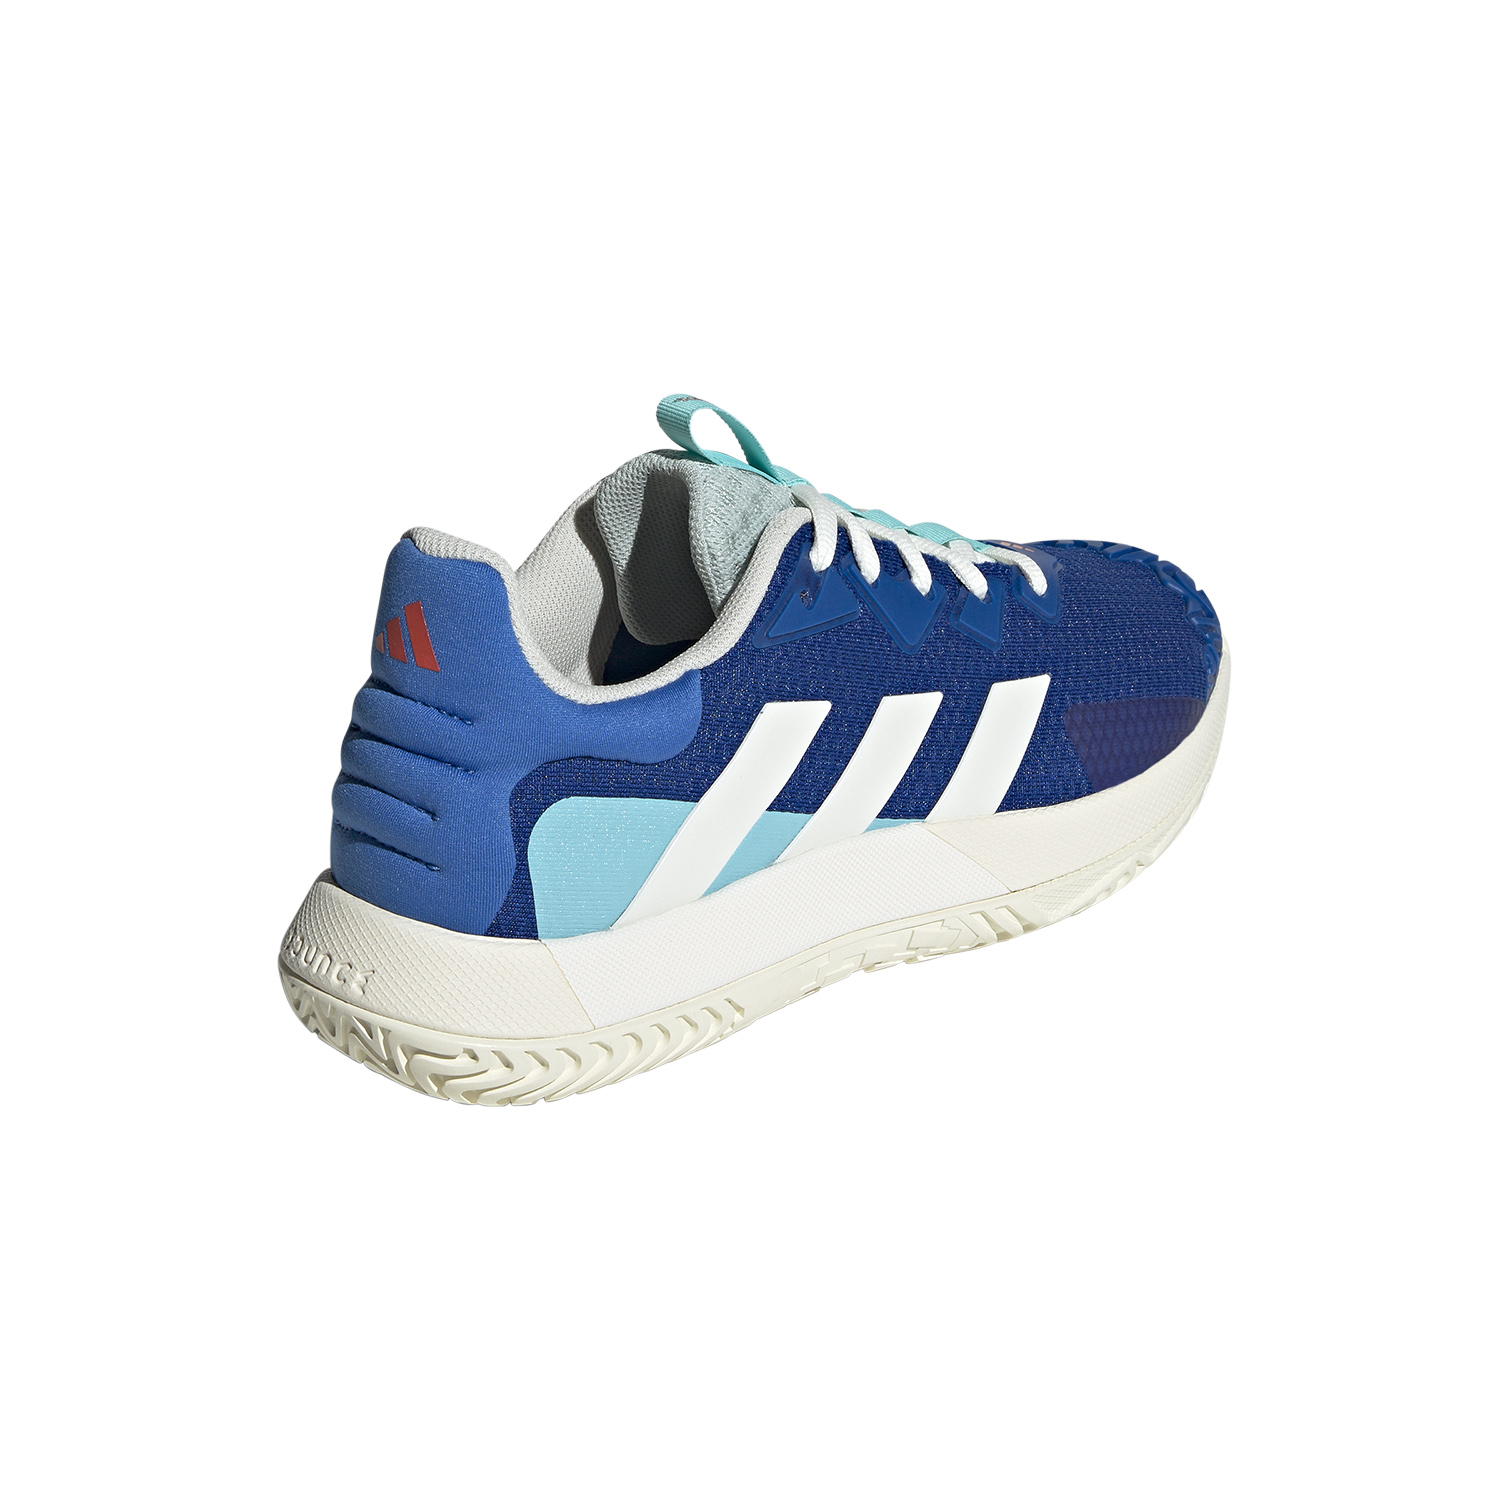 adidas SoleMatch Control - Team Royal Blue/Off White/Bright Royal